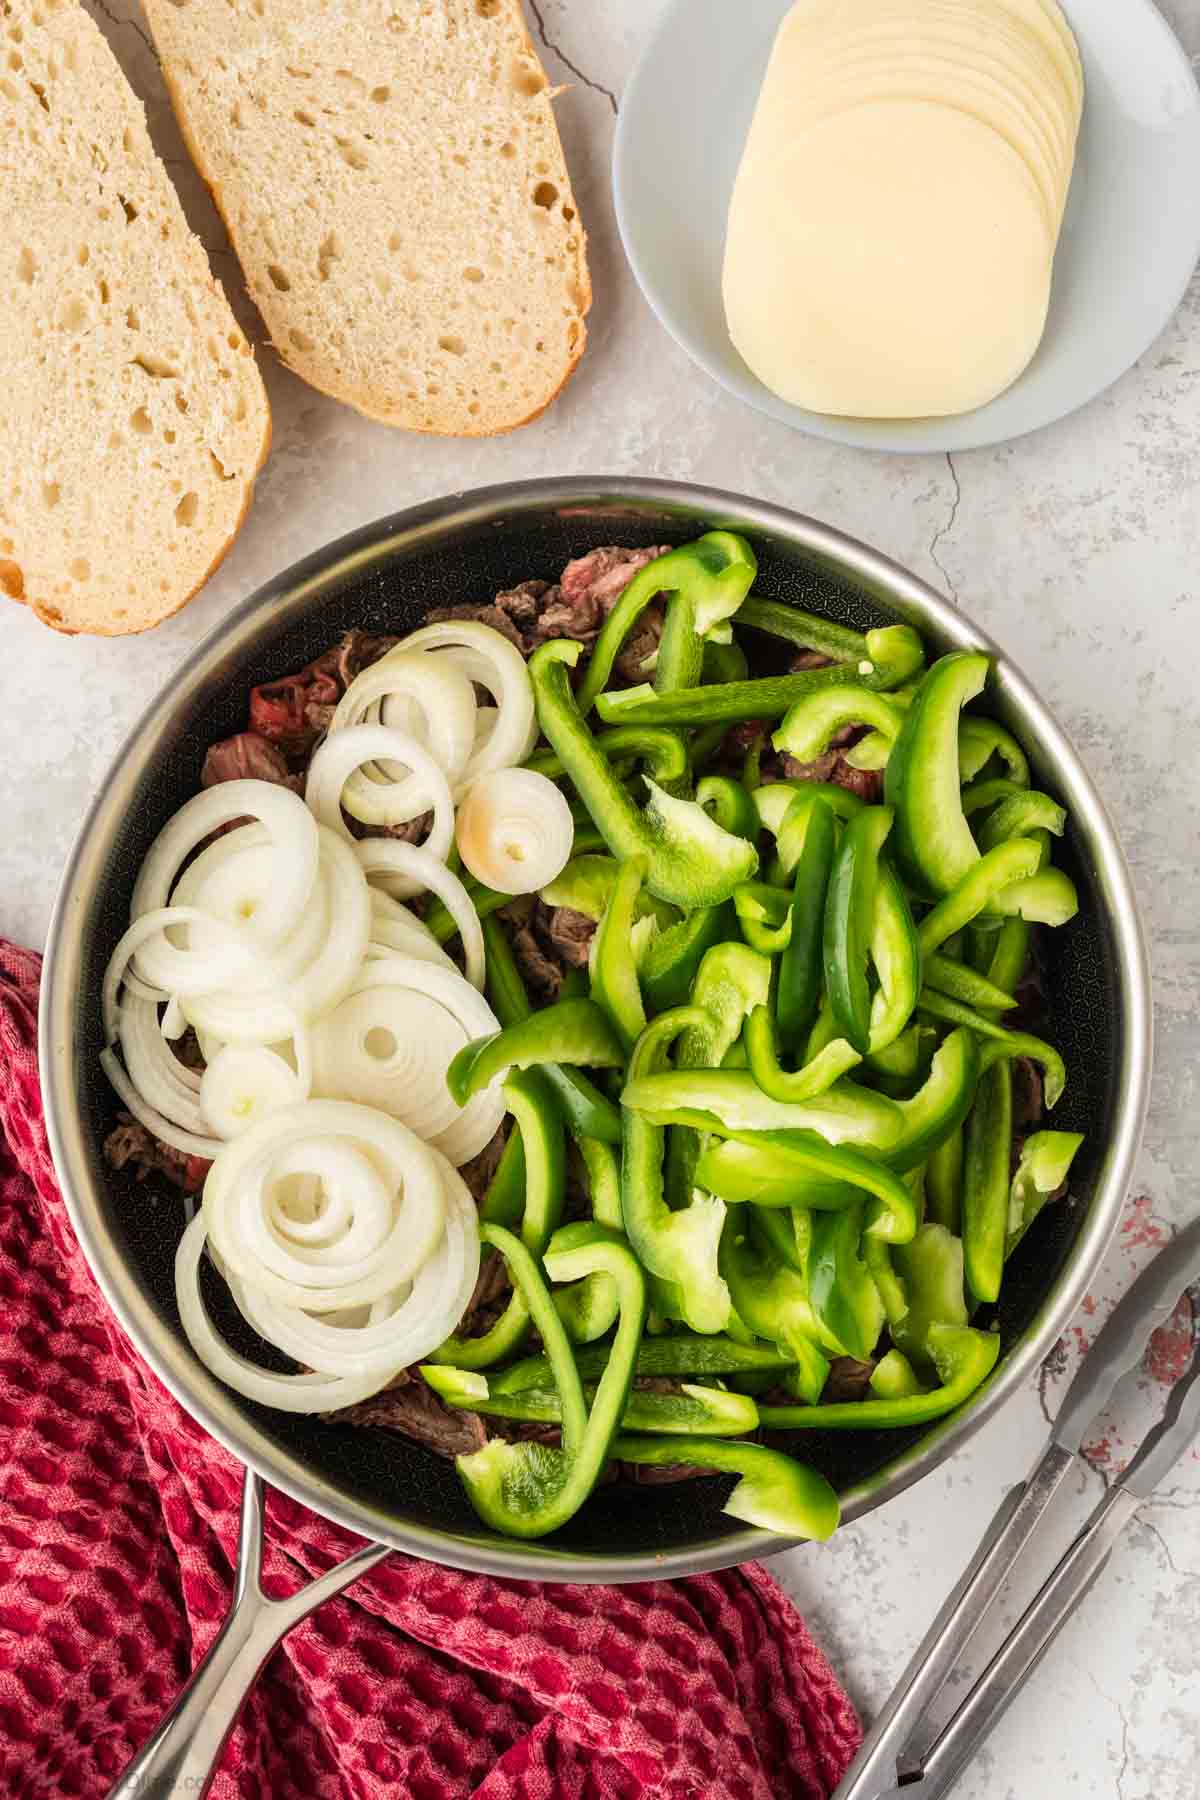 Cooking the veggies and steak in a skillet